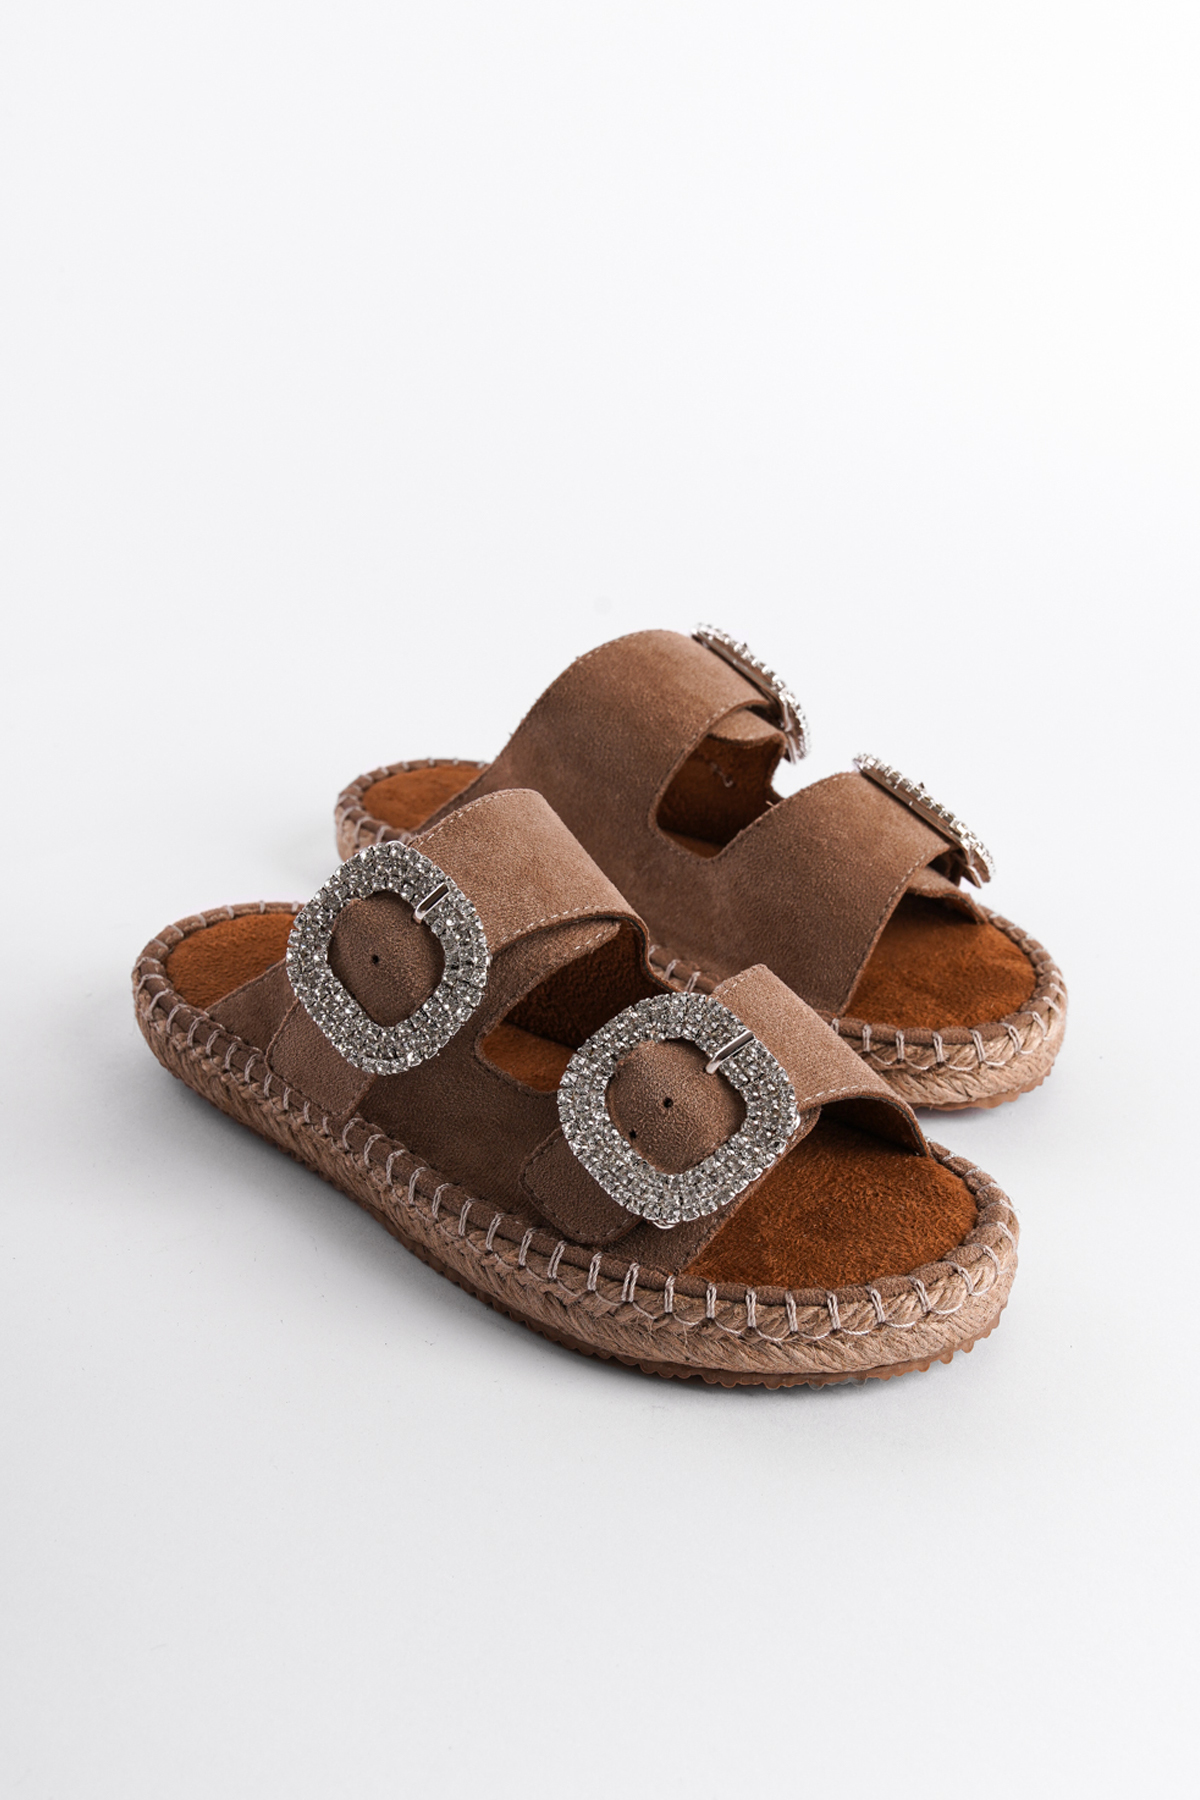 Capone Outfitters Women's Stone Espadrilles Slippers